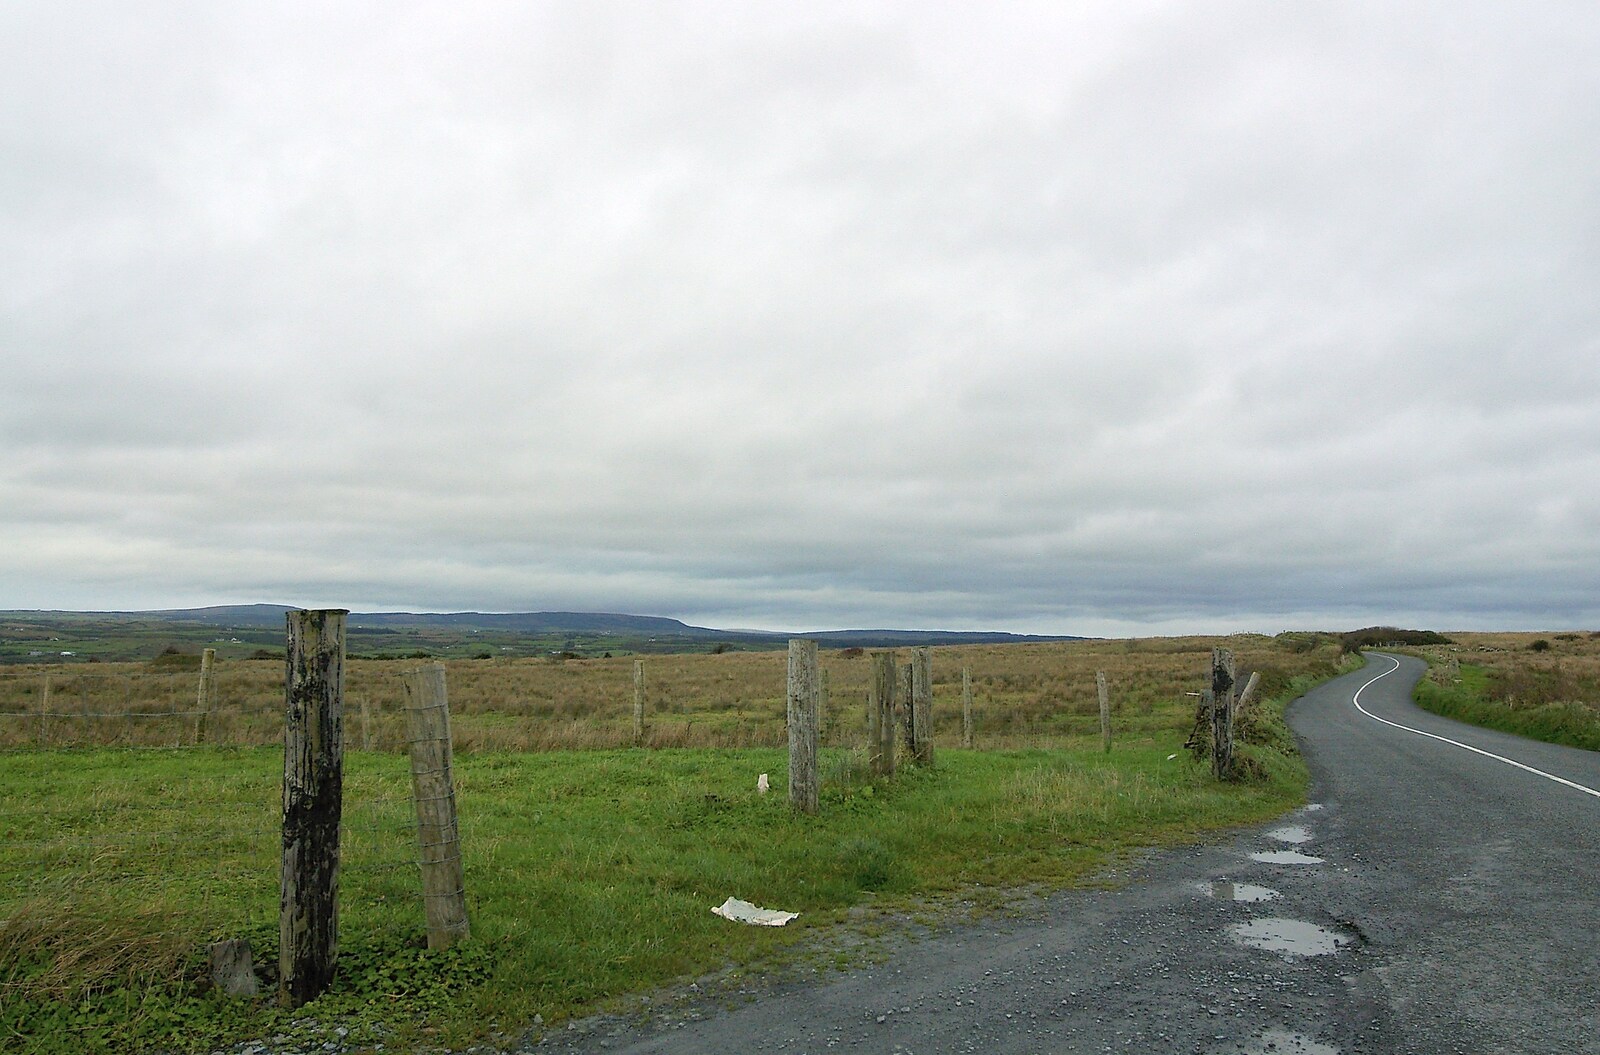 The first view of the Burran from Corofin, Ennistymon and The Burran, County Clare, Western Ireland - 27th October 2006